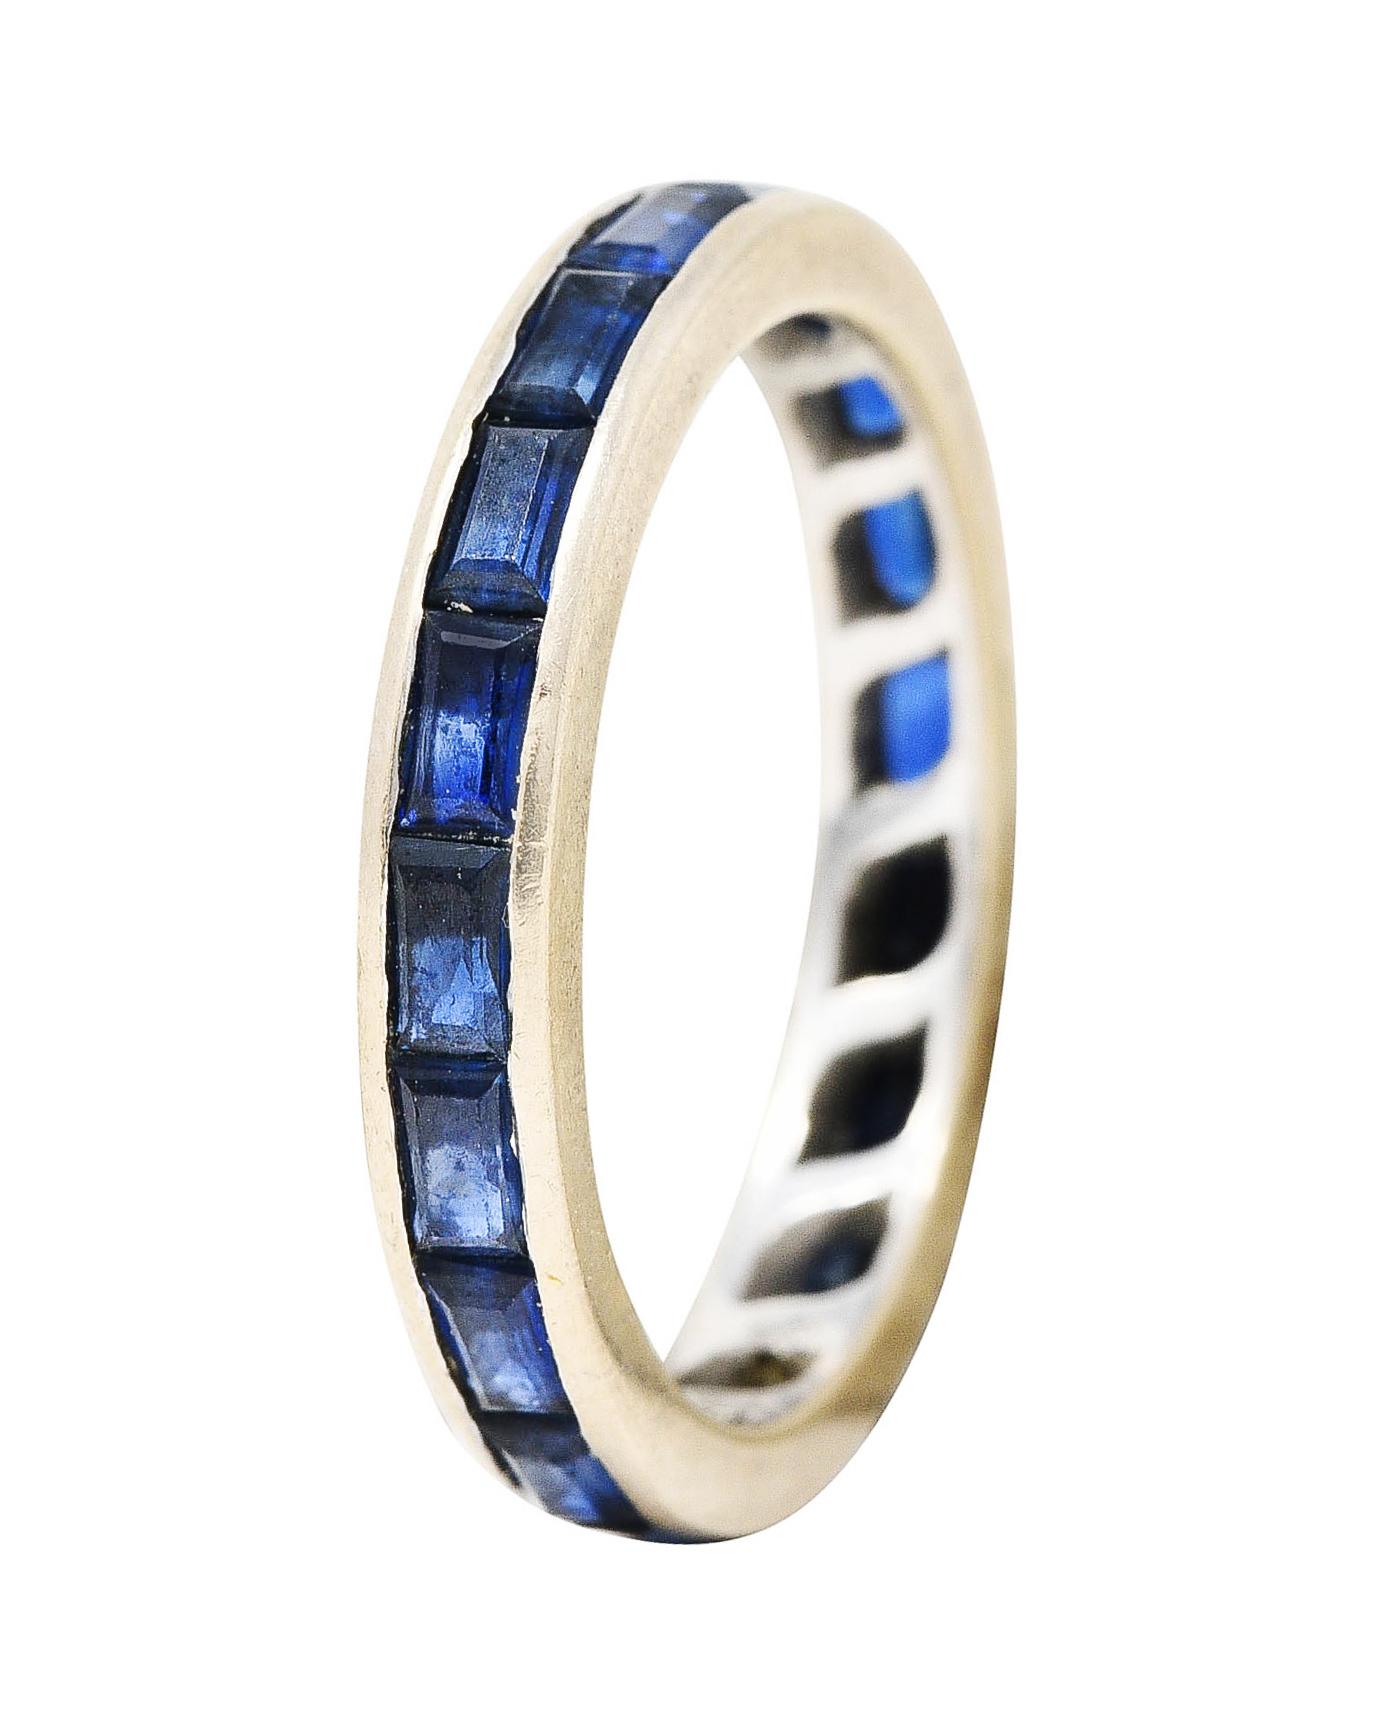 Eternity band ring is channel set fully around by calibrè cut sapphire

Very well matched in strong royal blue color

While weighing in total approximately 1.95 carats

Completed by polished channel walls

Stamped 750 for 18 karat gold

With maker's